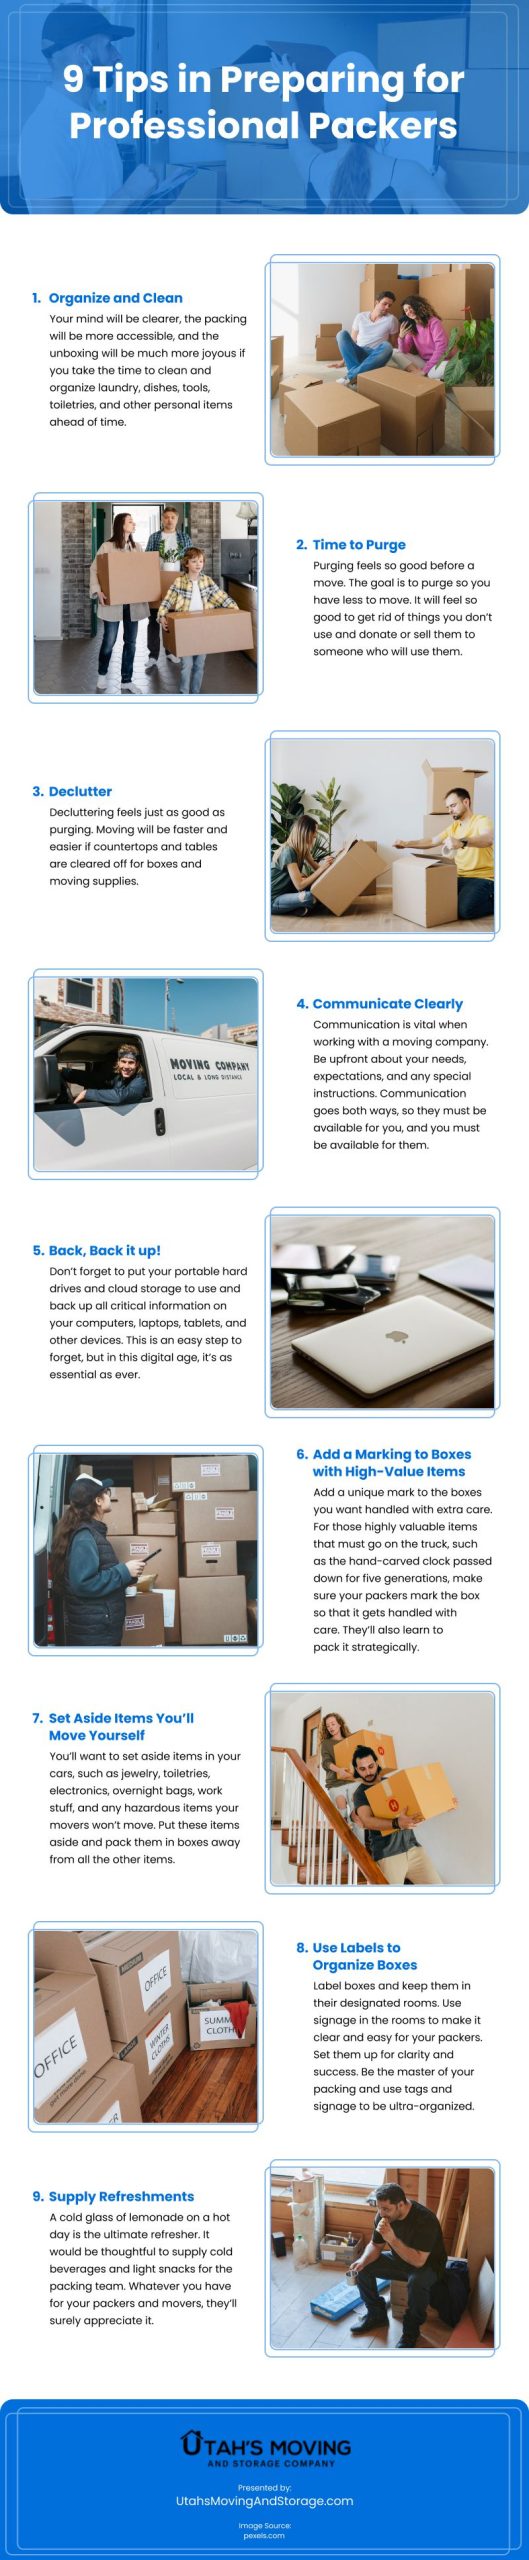 9 Tips in Preparing for Professional Packers Infographic